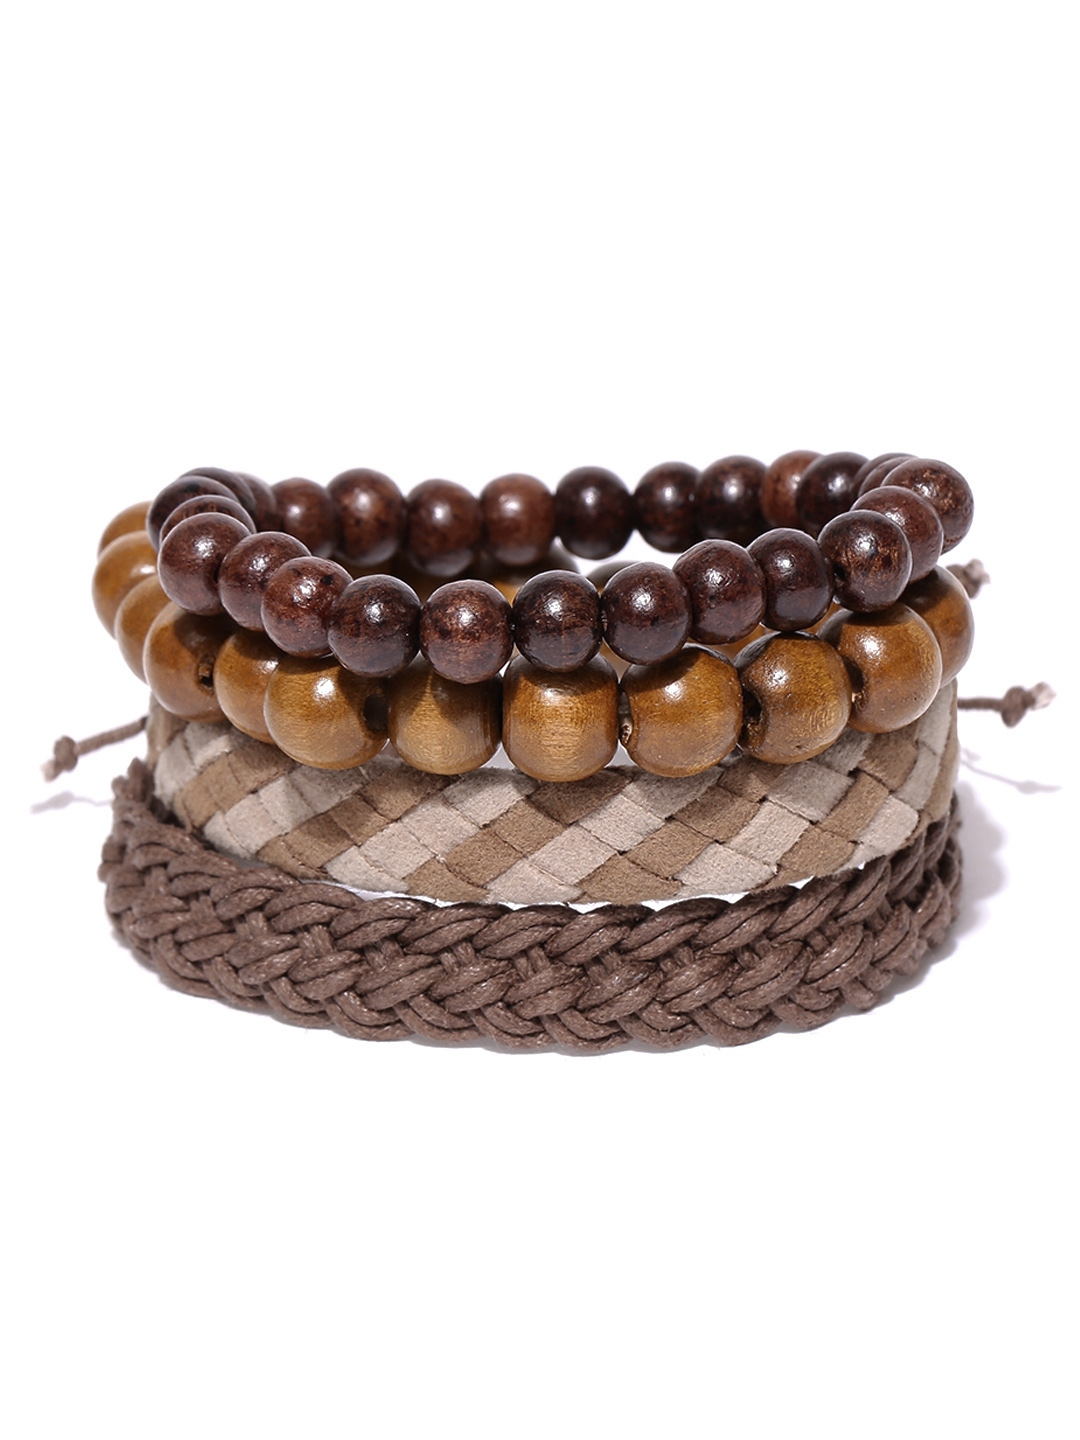 THE MEN THING Leather Bracelet for Men  American Style Brown Genuine  Leather MultiLayer Braided Bracelet